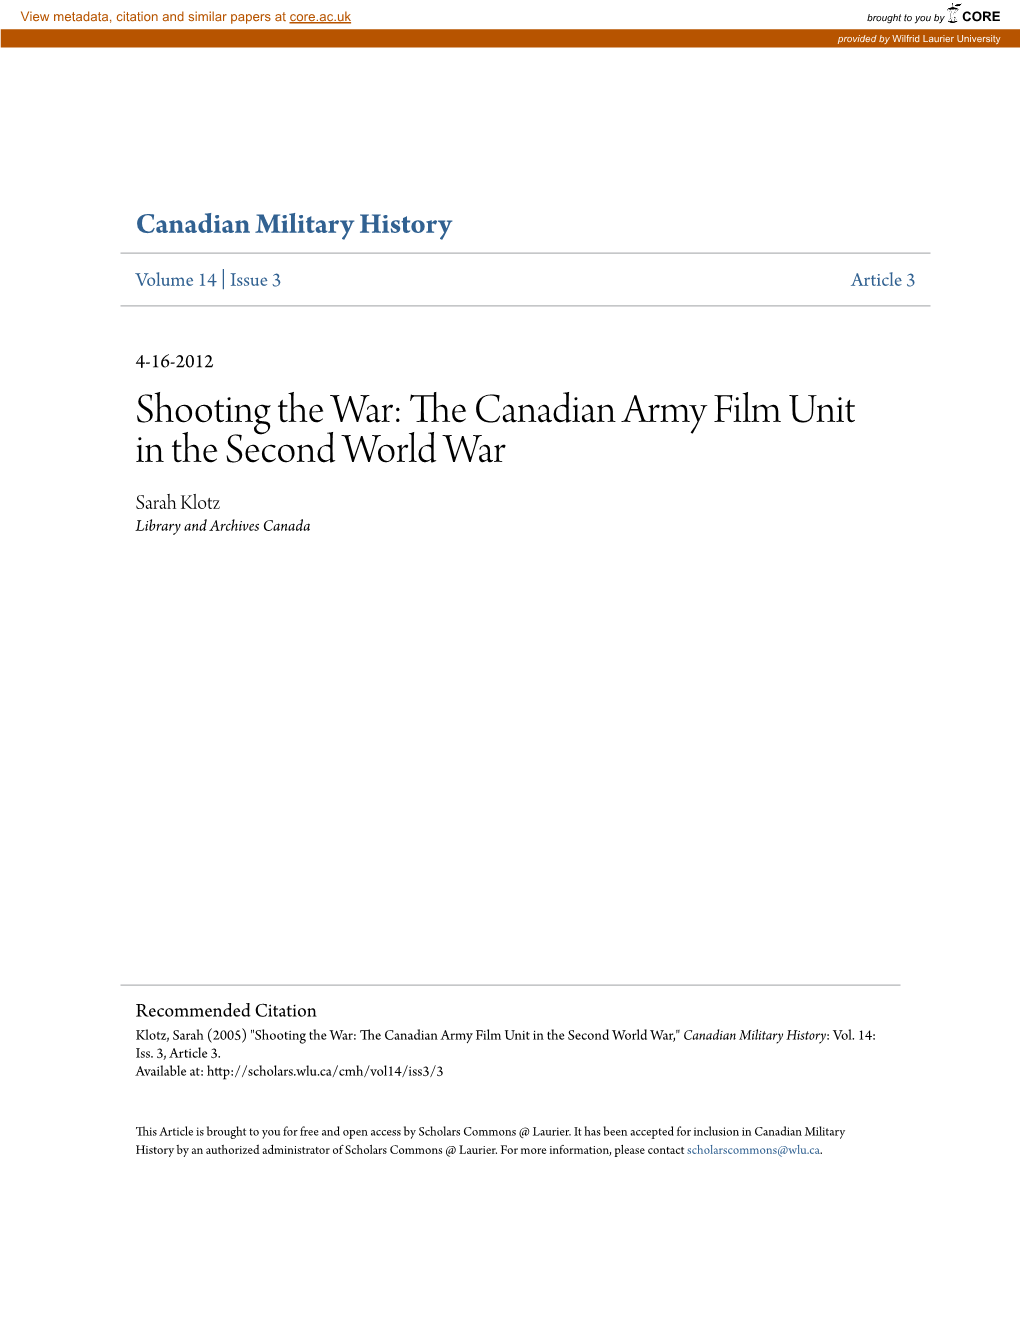 Shooting the War: the Canadian Army Film Unit in the Second World